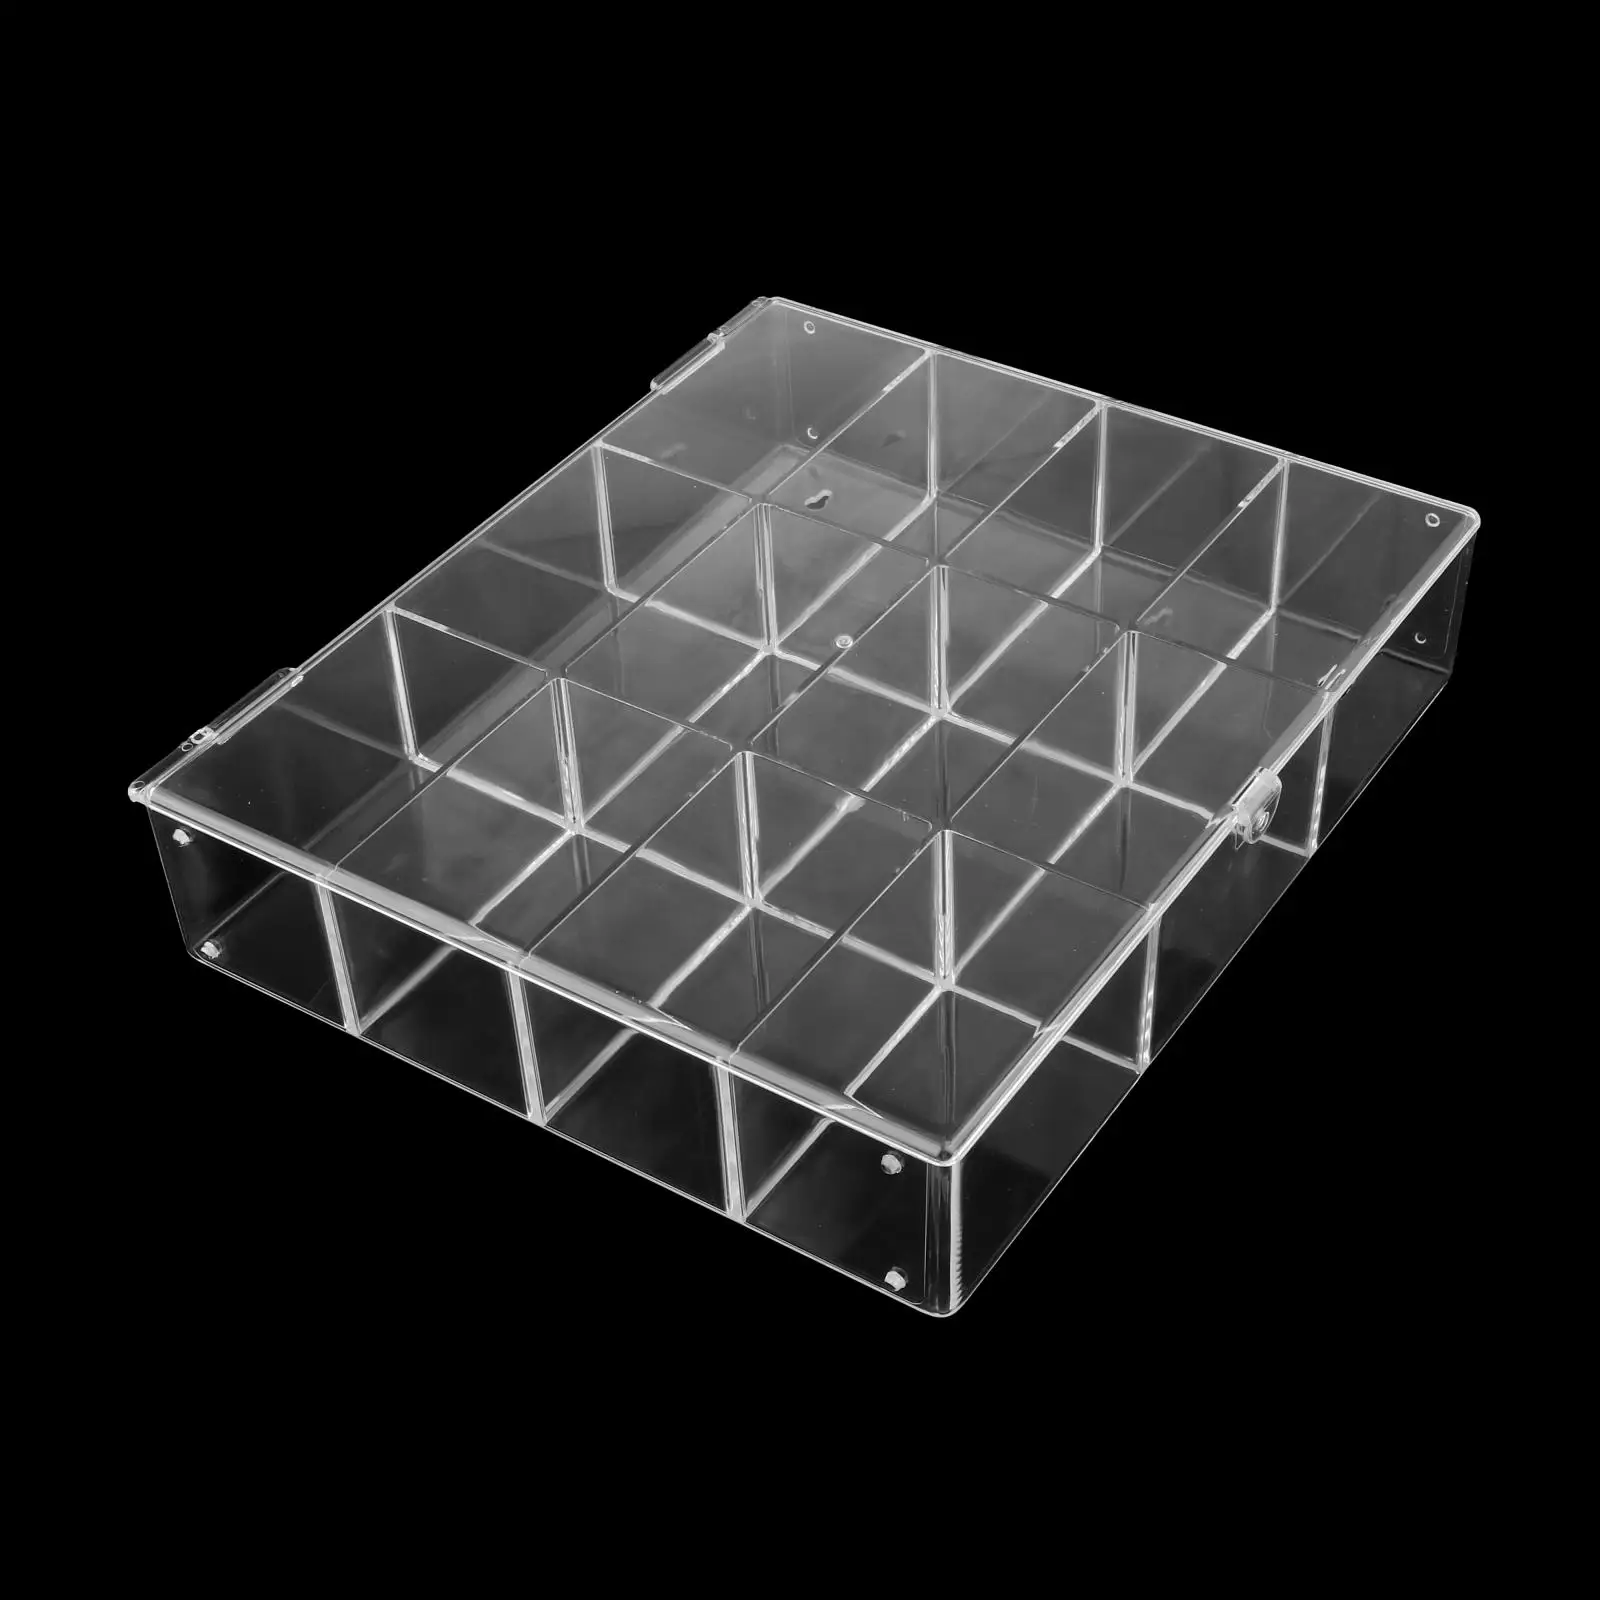 Acrylic Display Case Countertop Stand Showcase for Mini Figures Collectibles